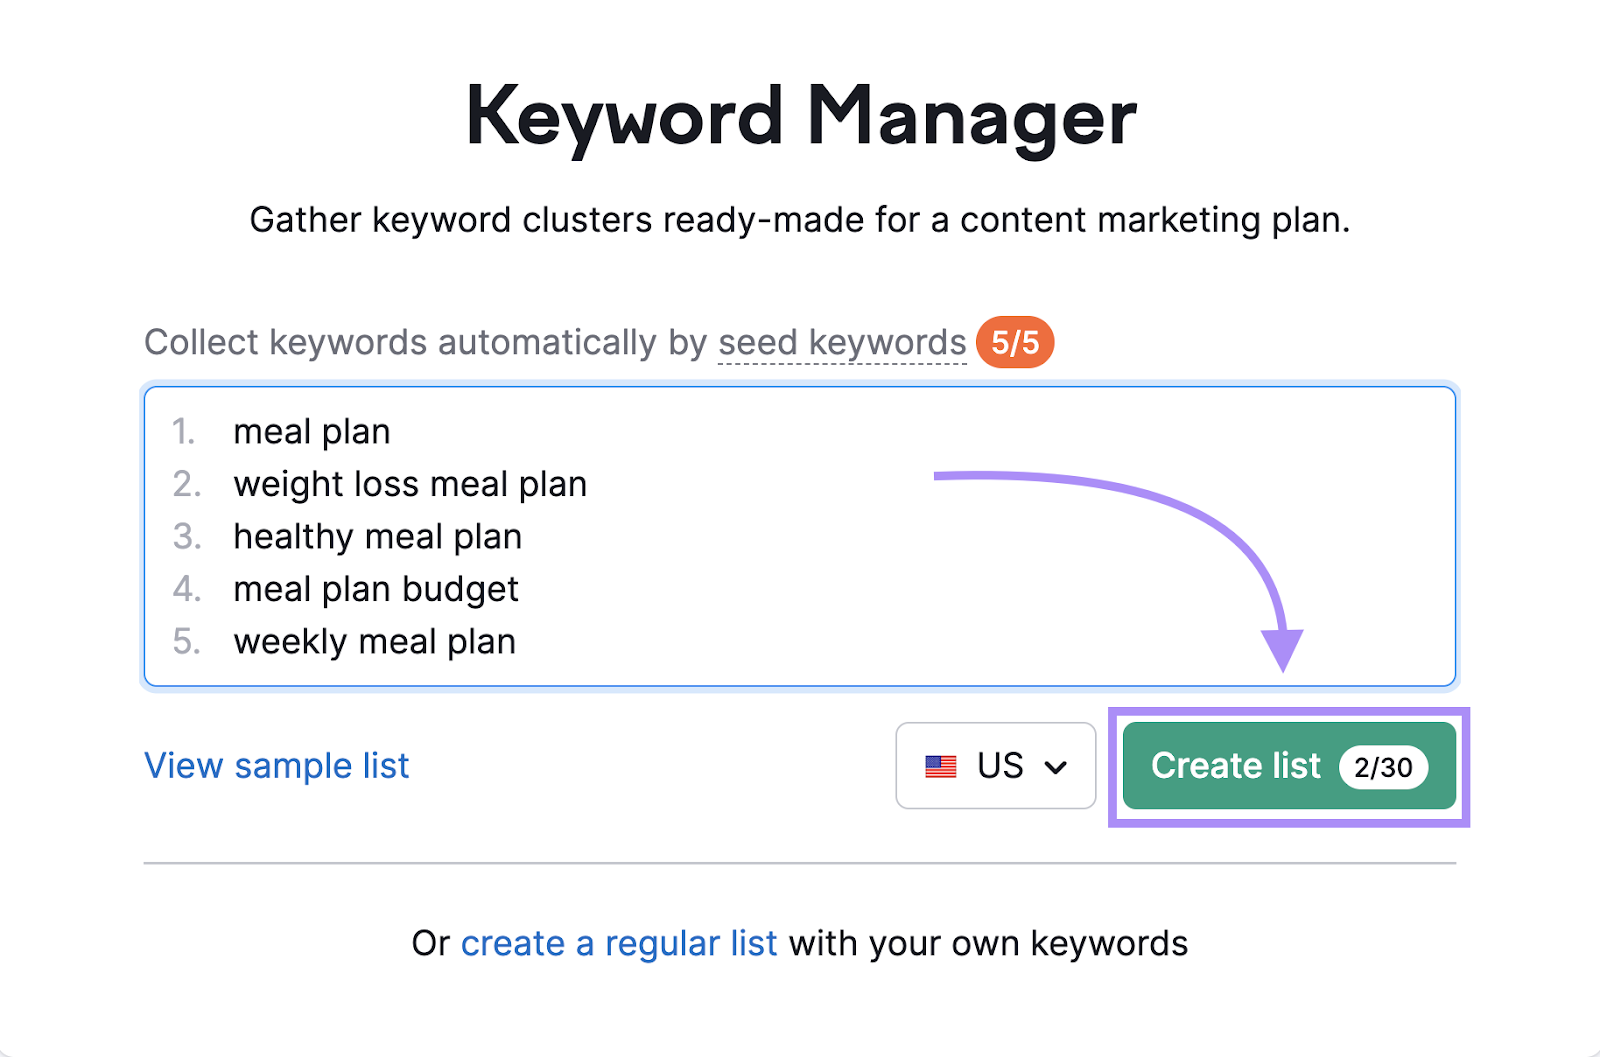 Entering keywords into the Keyword Manager tool